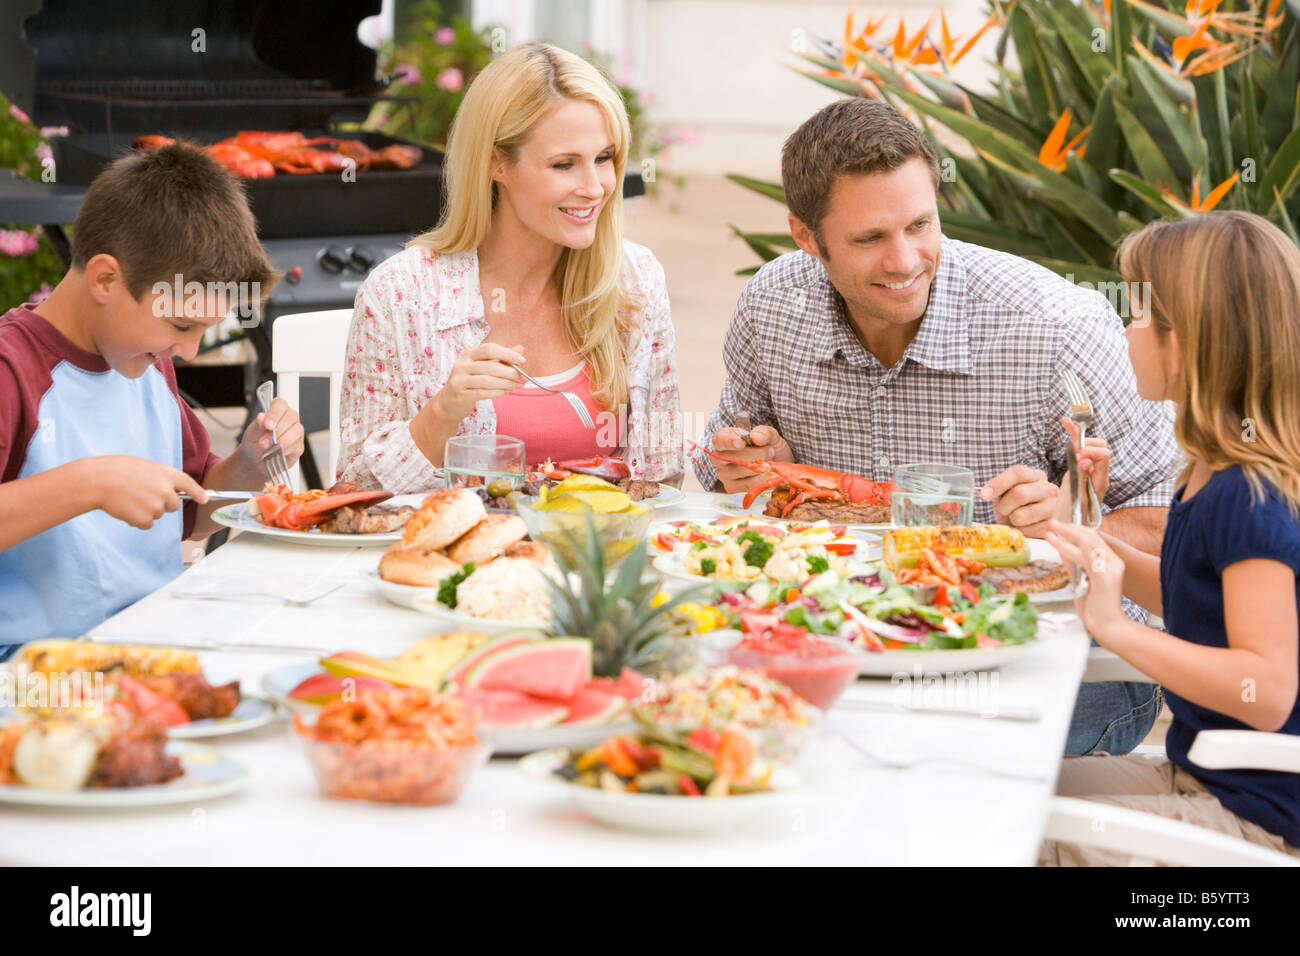 Family Enjoying A Barbeque Stock Photo